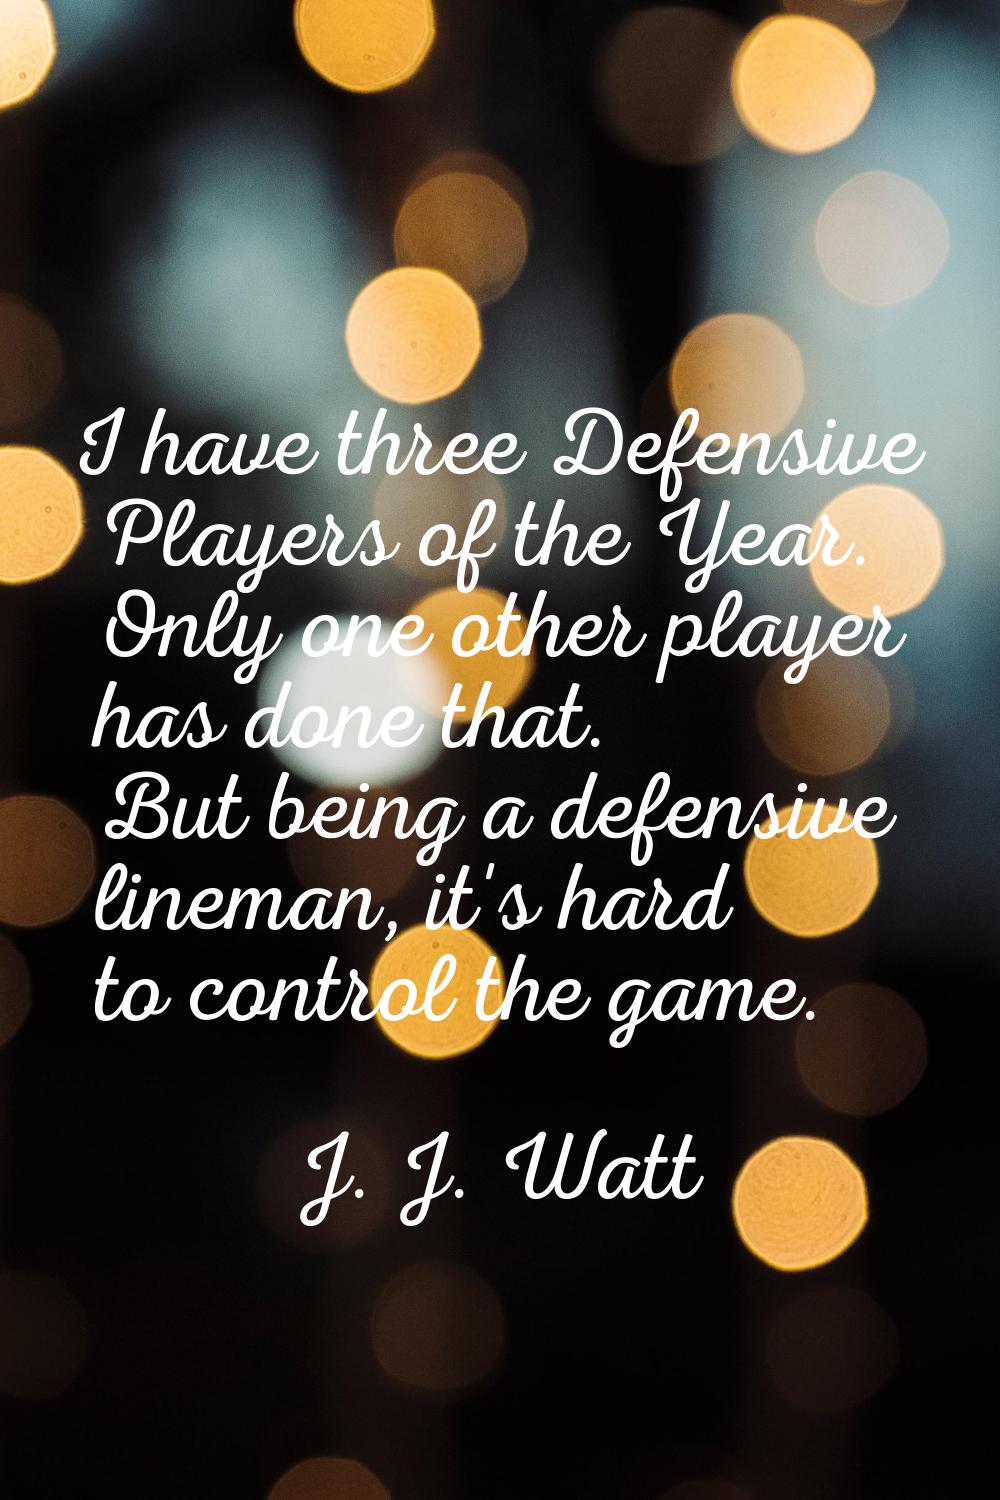 I have three Defensive Players of the Year. Only one other player has done that. But being a defens